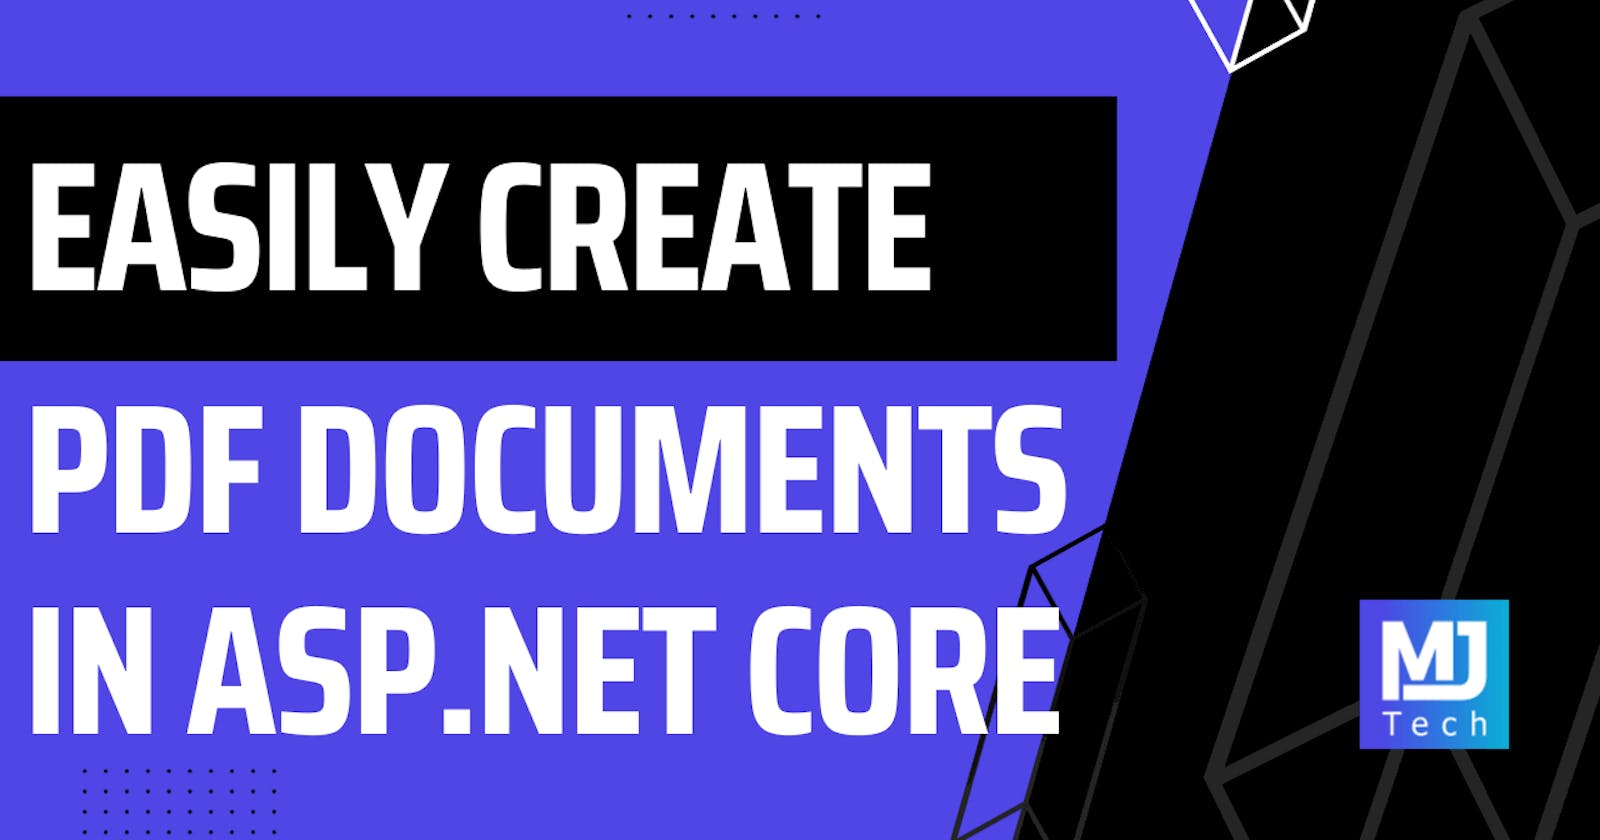 How To Easily Create PDF Documents in ASP.NET Core